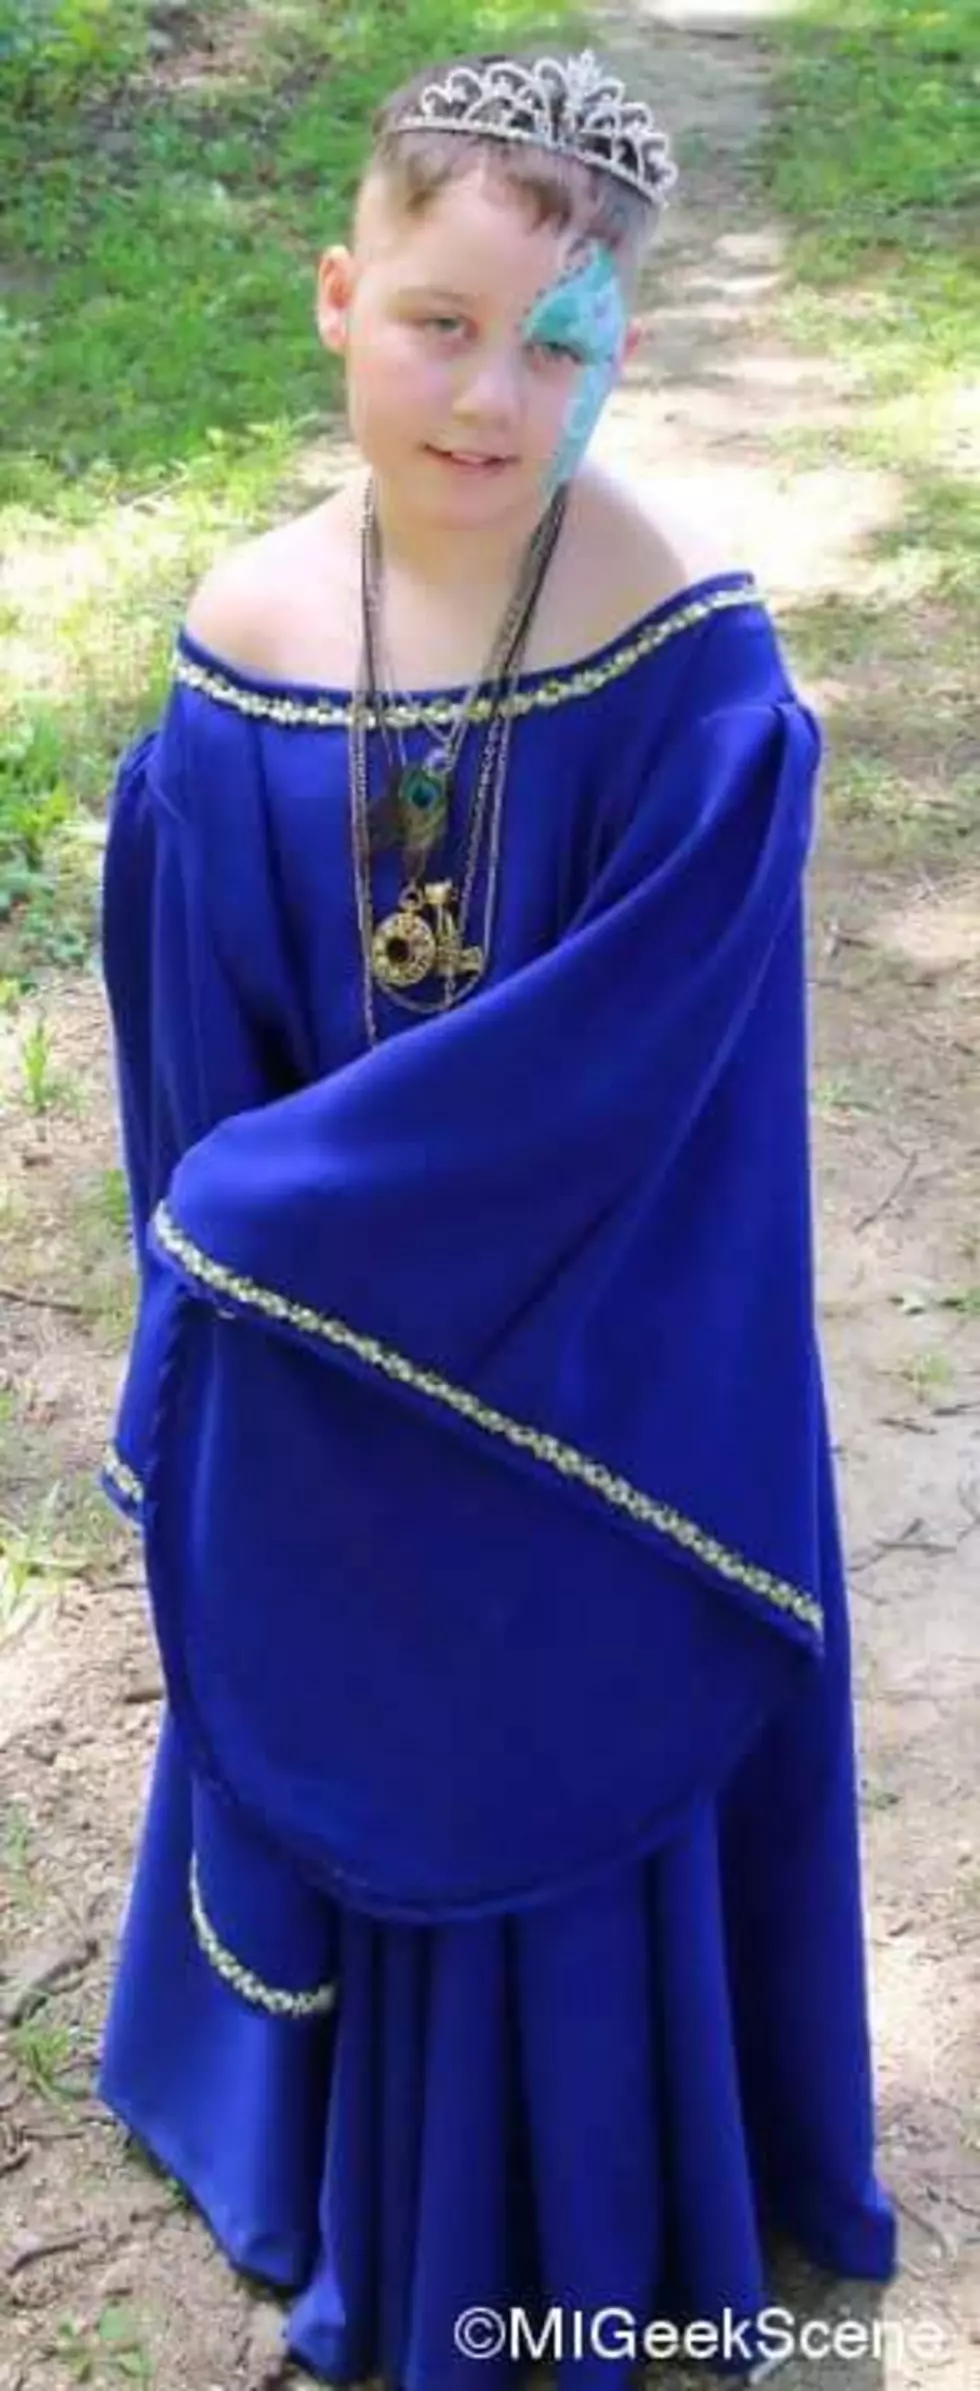 Medieval festival’s 12 Year Old ‘Princess’ Struggling With Brain Cancer